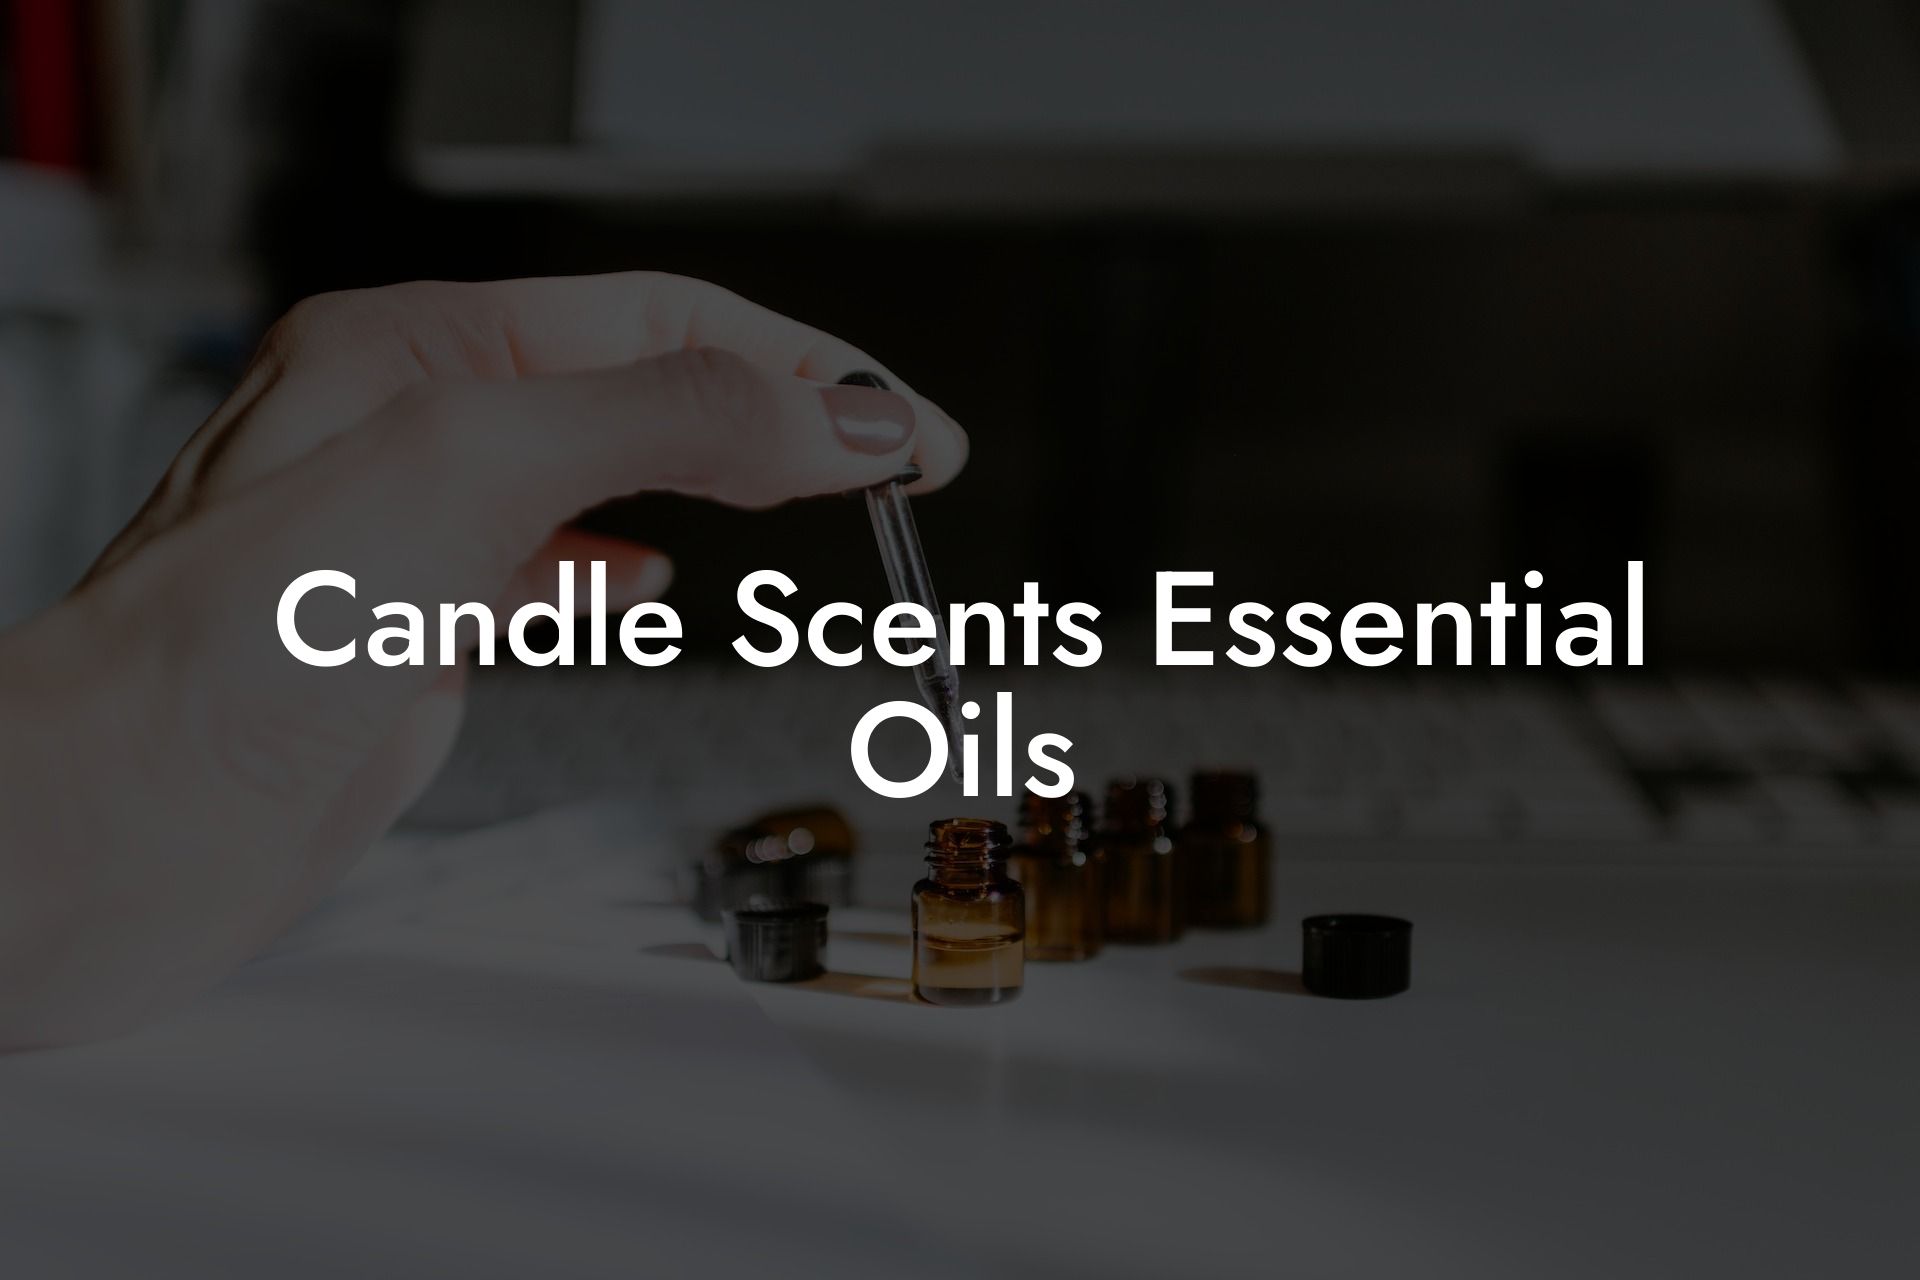 Candle Scents Essential Oils